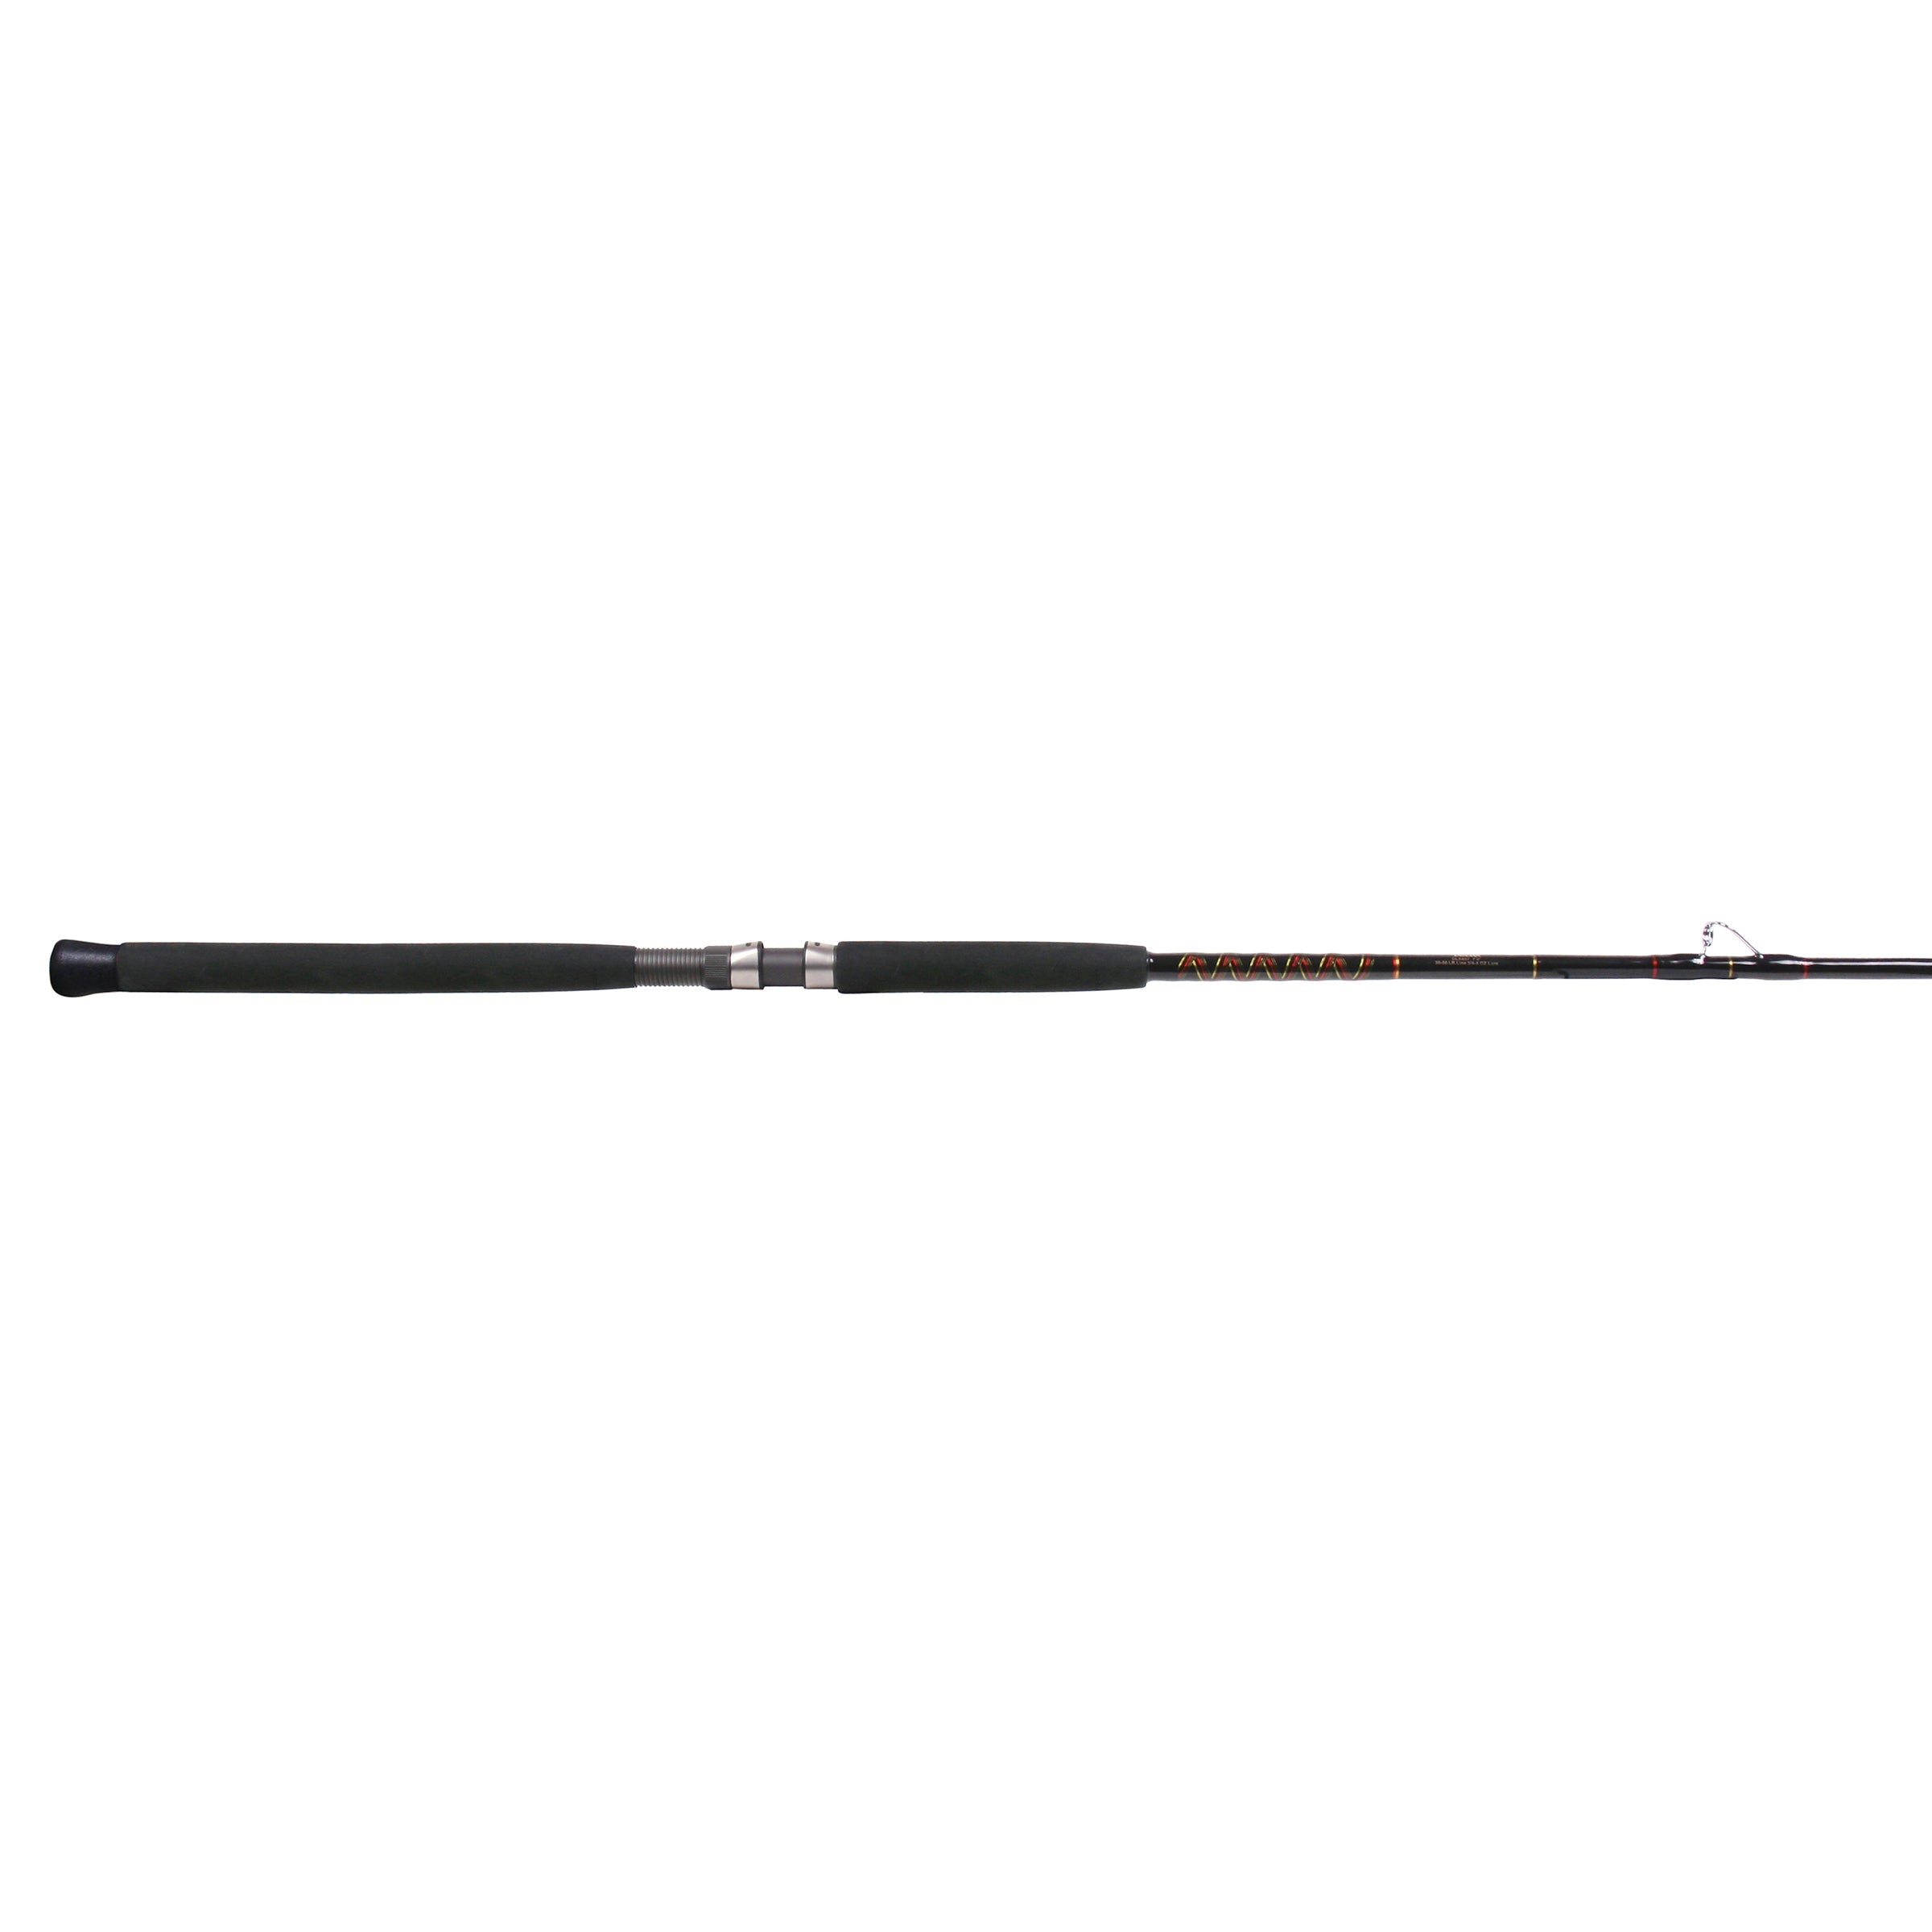 Delux Boat Conventional Rods - Foul Proof Guides